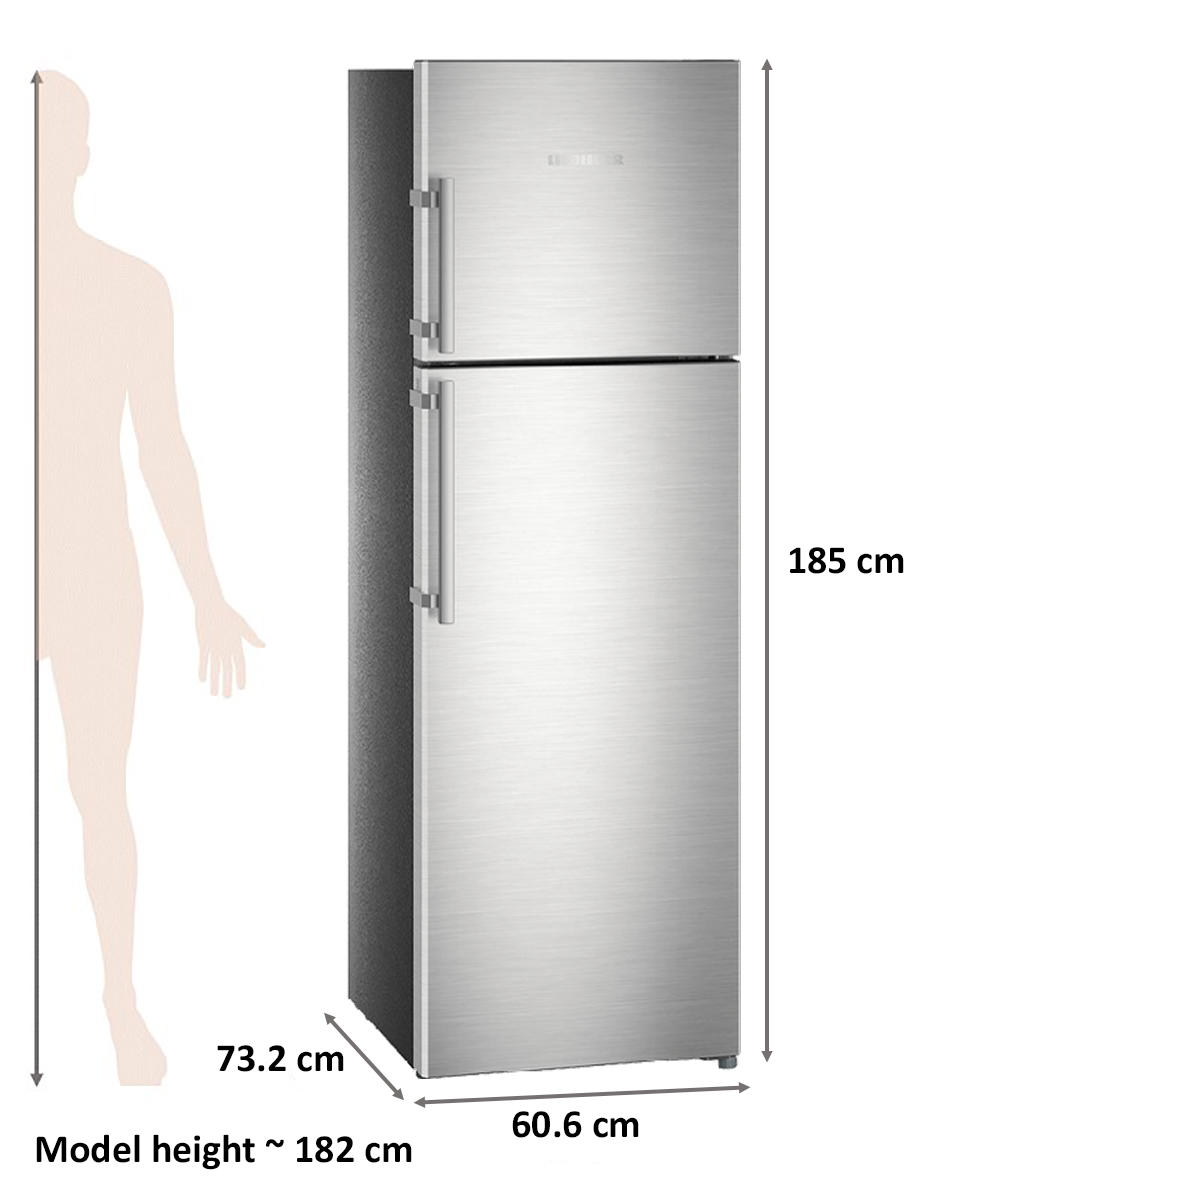 Liebherr 346 Litres 3 Star Frost Free Inverter Double Door Refrigerator (Central Power Cooling, TCss 3520, Stainless Steel)_2